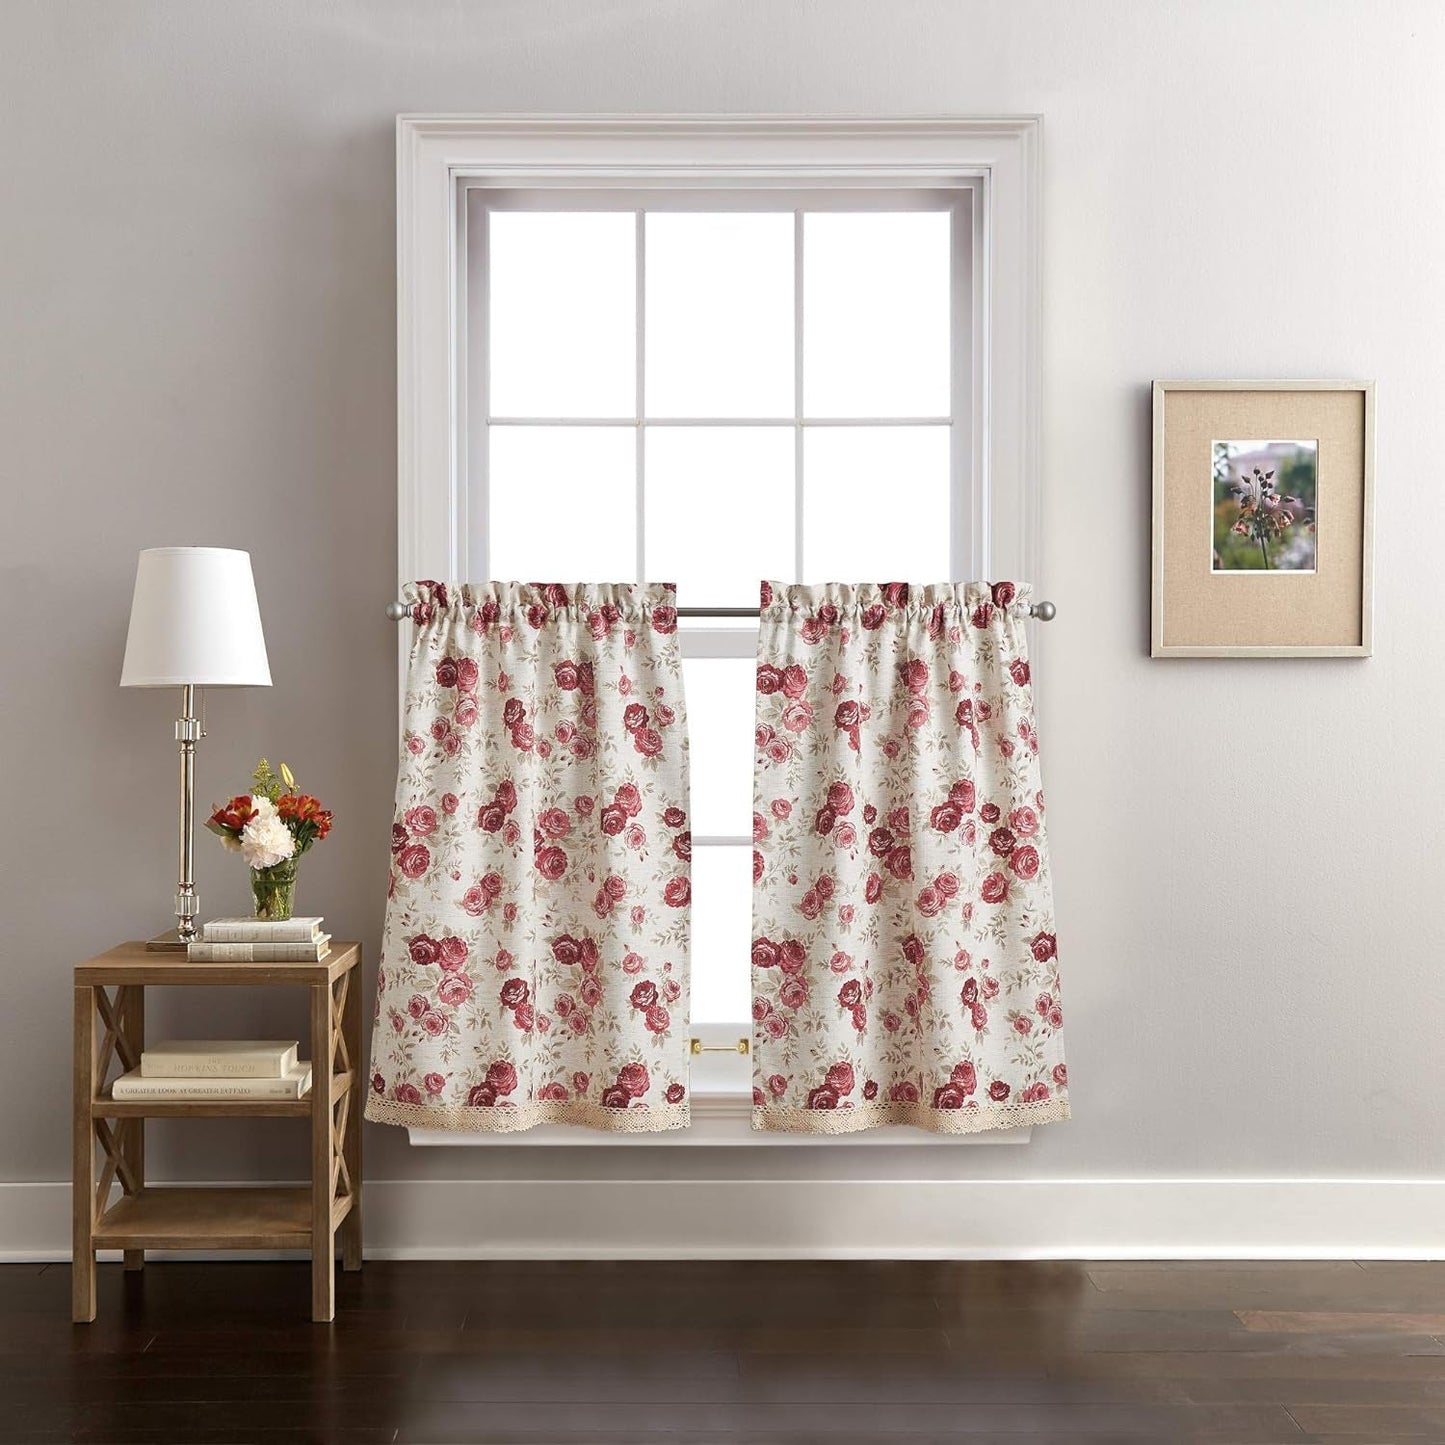 CHF Floral Print Antique Rose Window Kitchen Curtain Valance, Rod Pocket, 54W X 24L Inch, Red (Red, 14-Inch Valance)